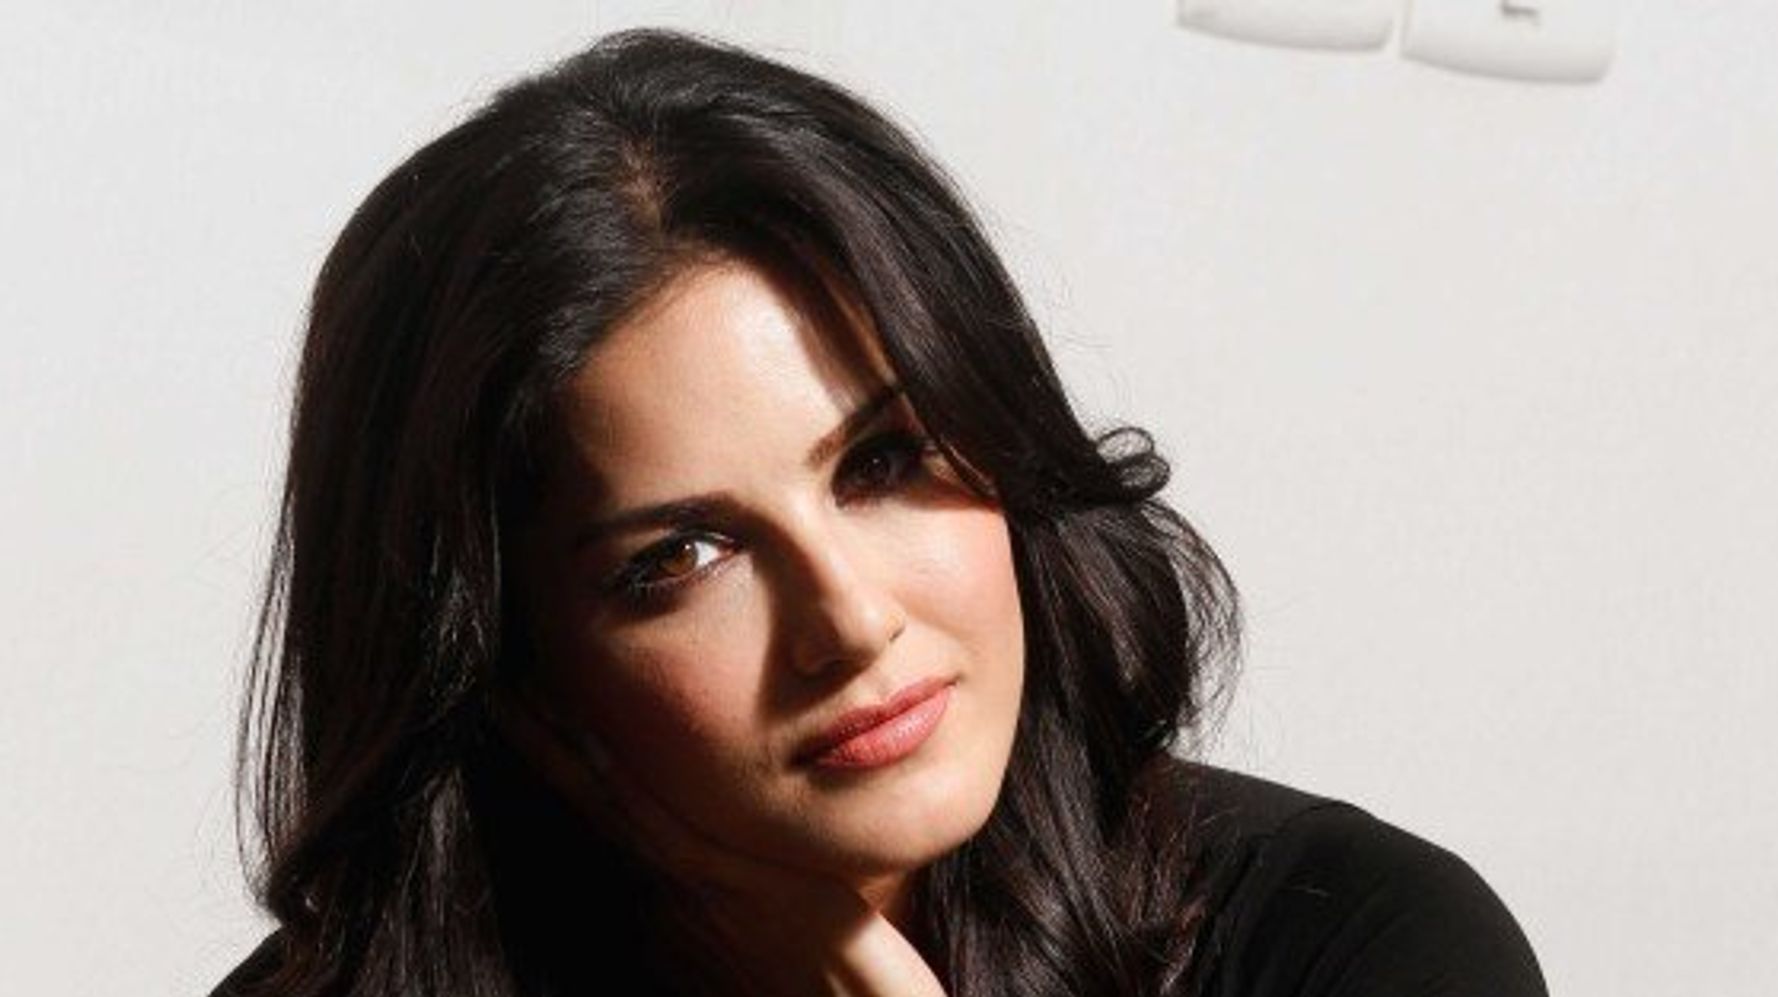 Sunny Sxx - Sunny Leone's Movies Are Tanking At The Box-Office And She Has No Idea Why  | HuffPost News